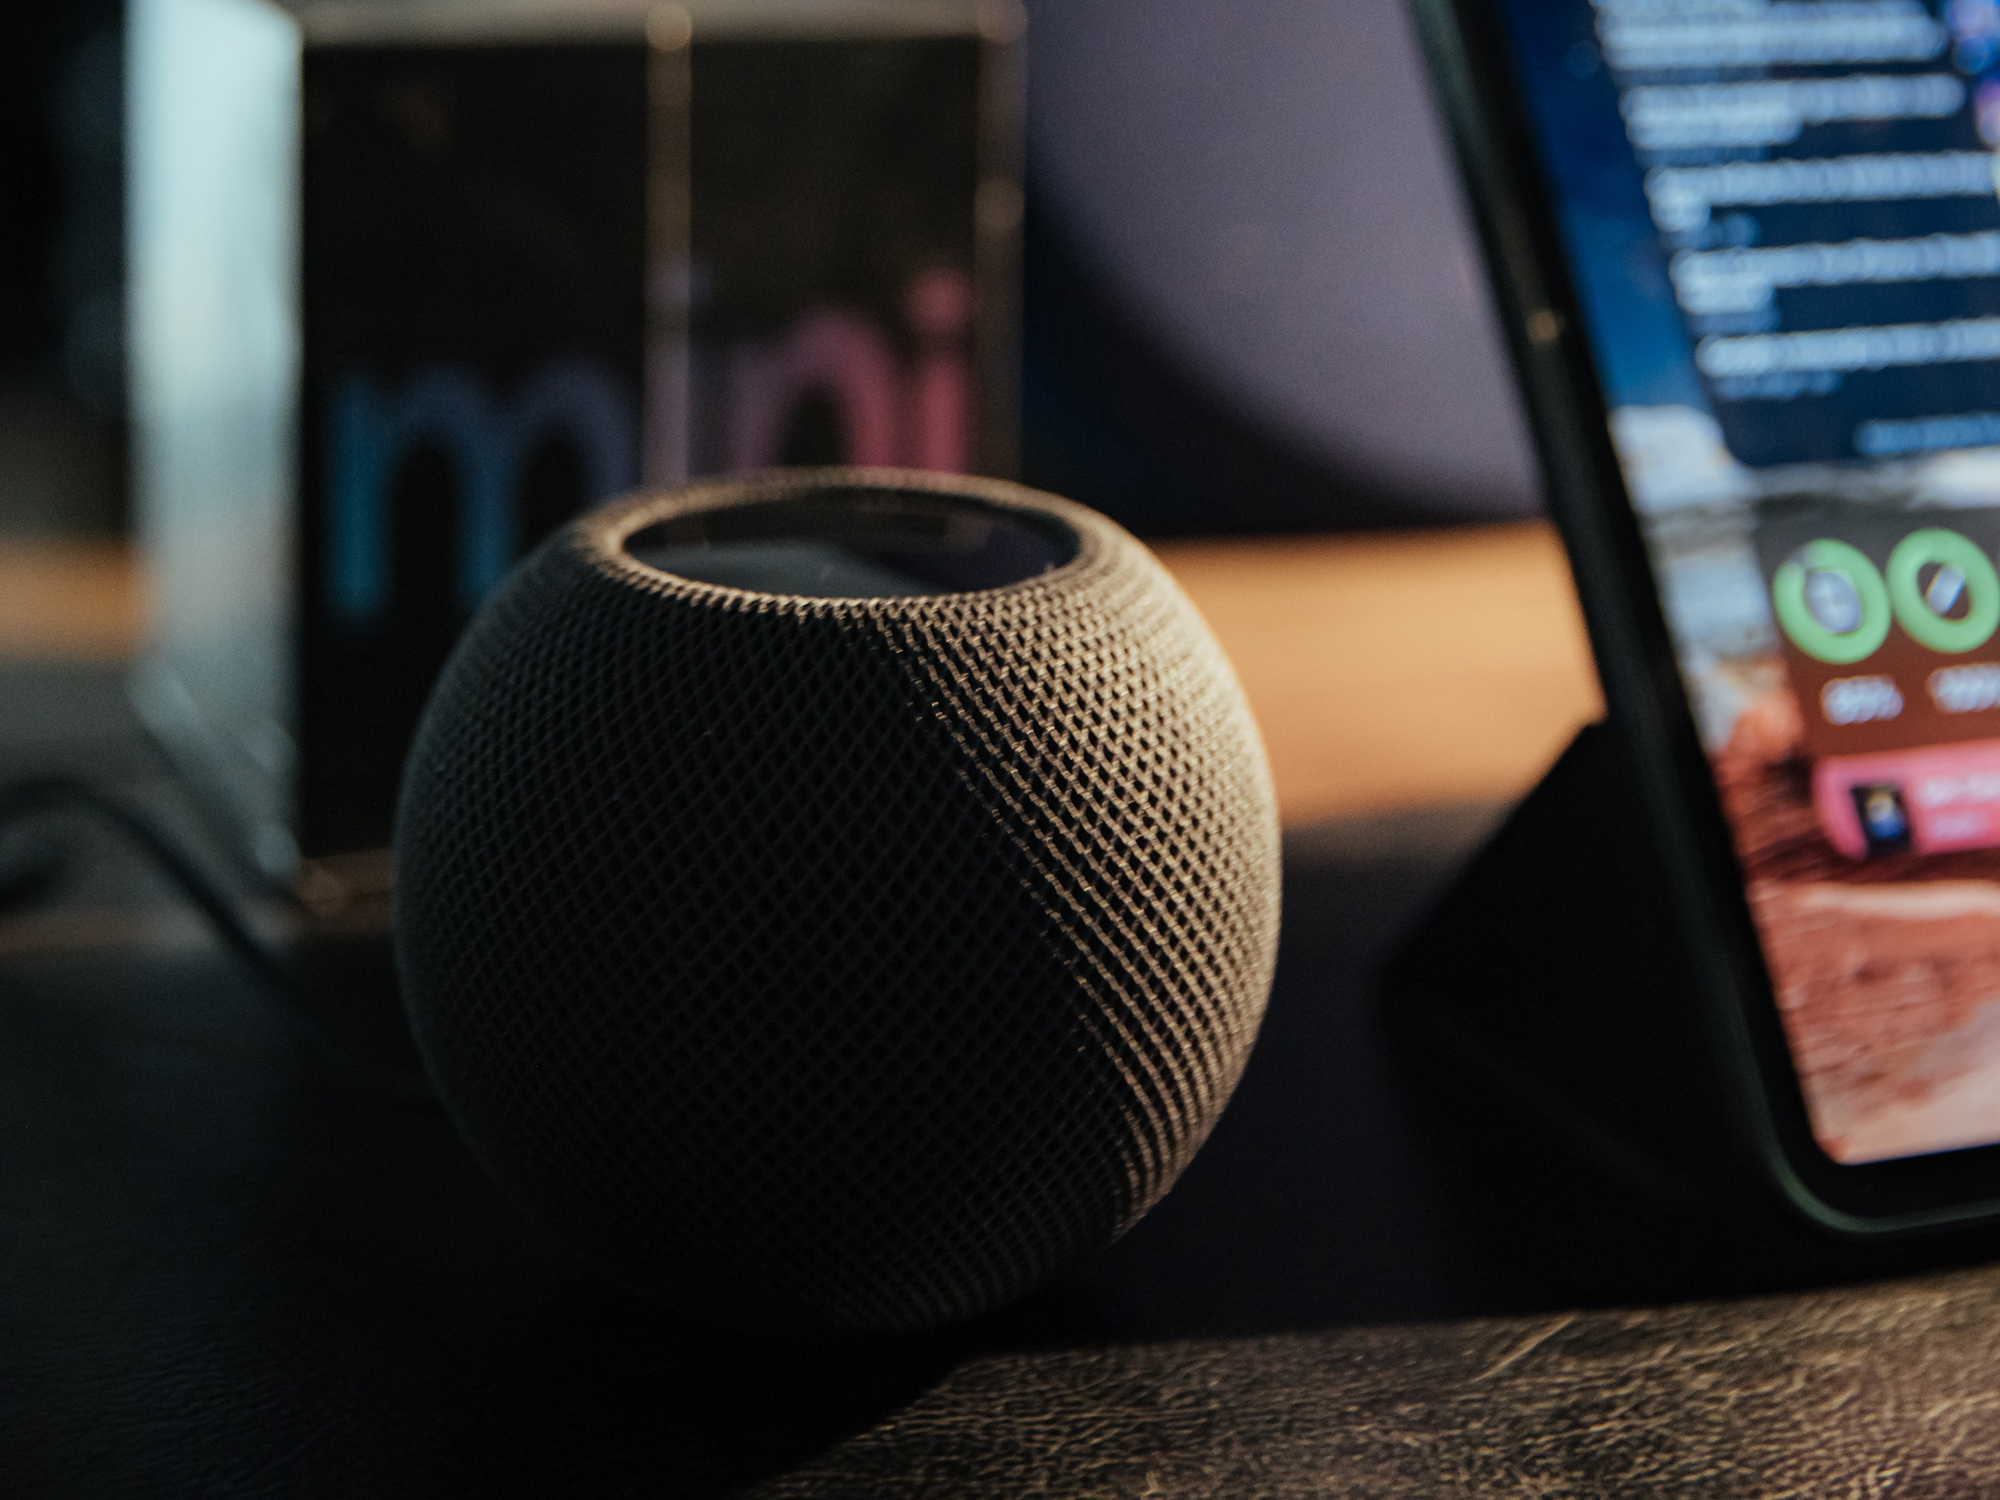 Wake up to a customized alarm on your smart speaker